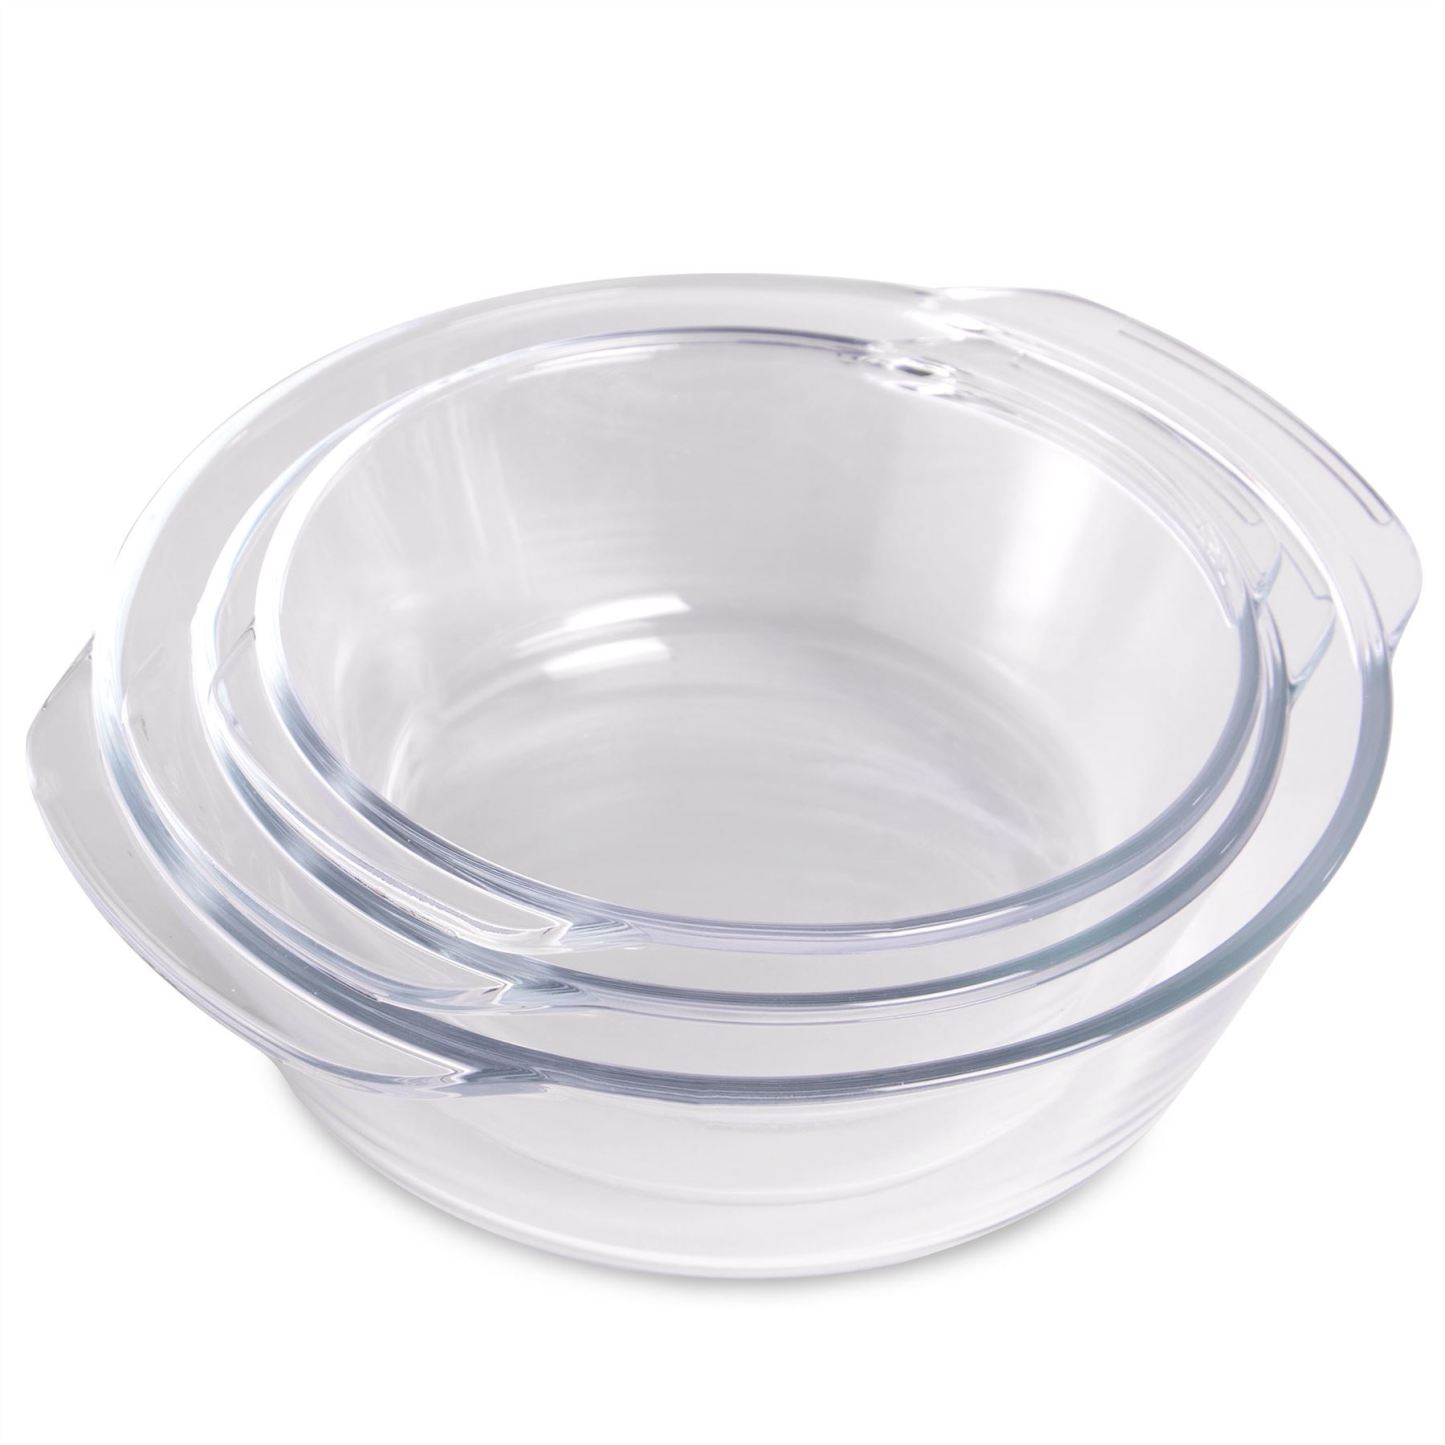 Glass Cooking Dishes - Set of 3 | M&W